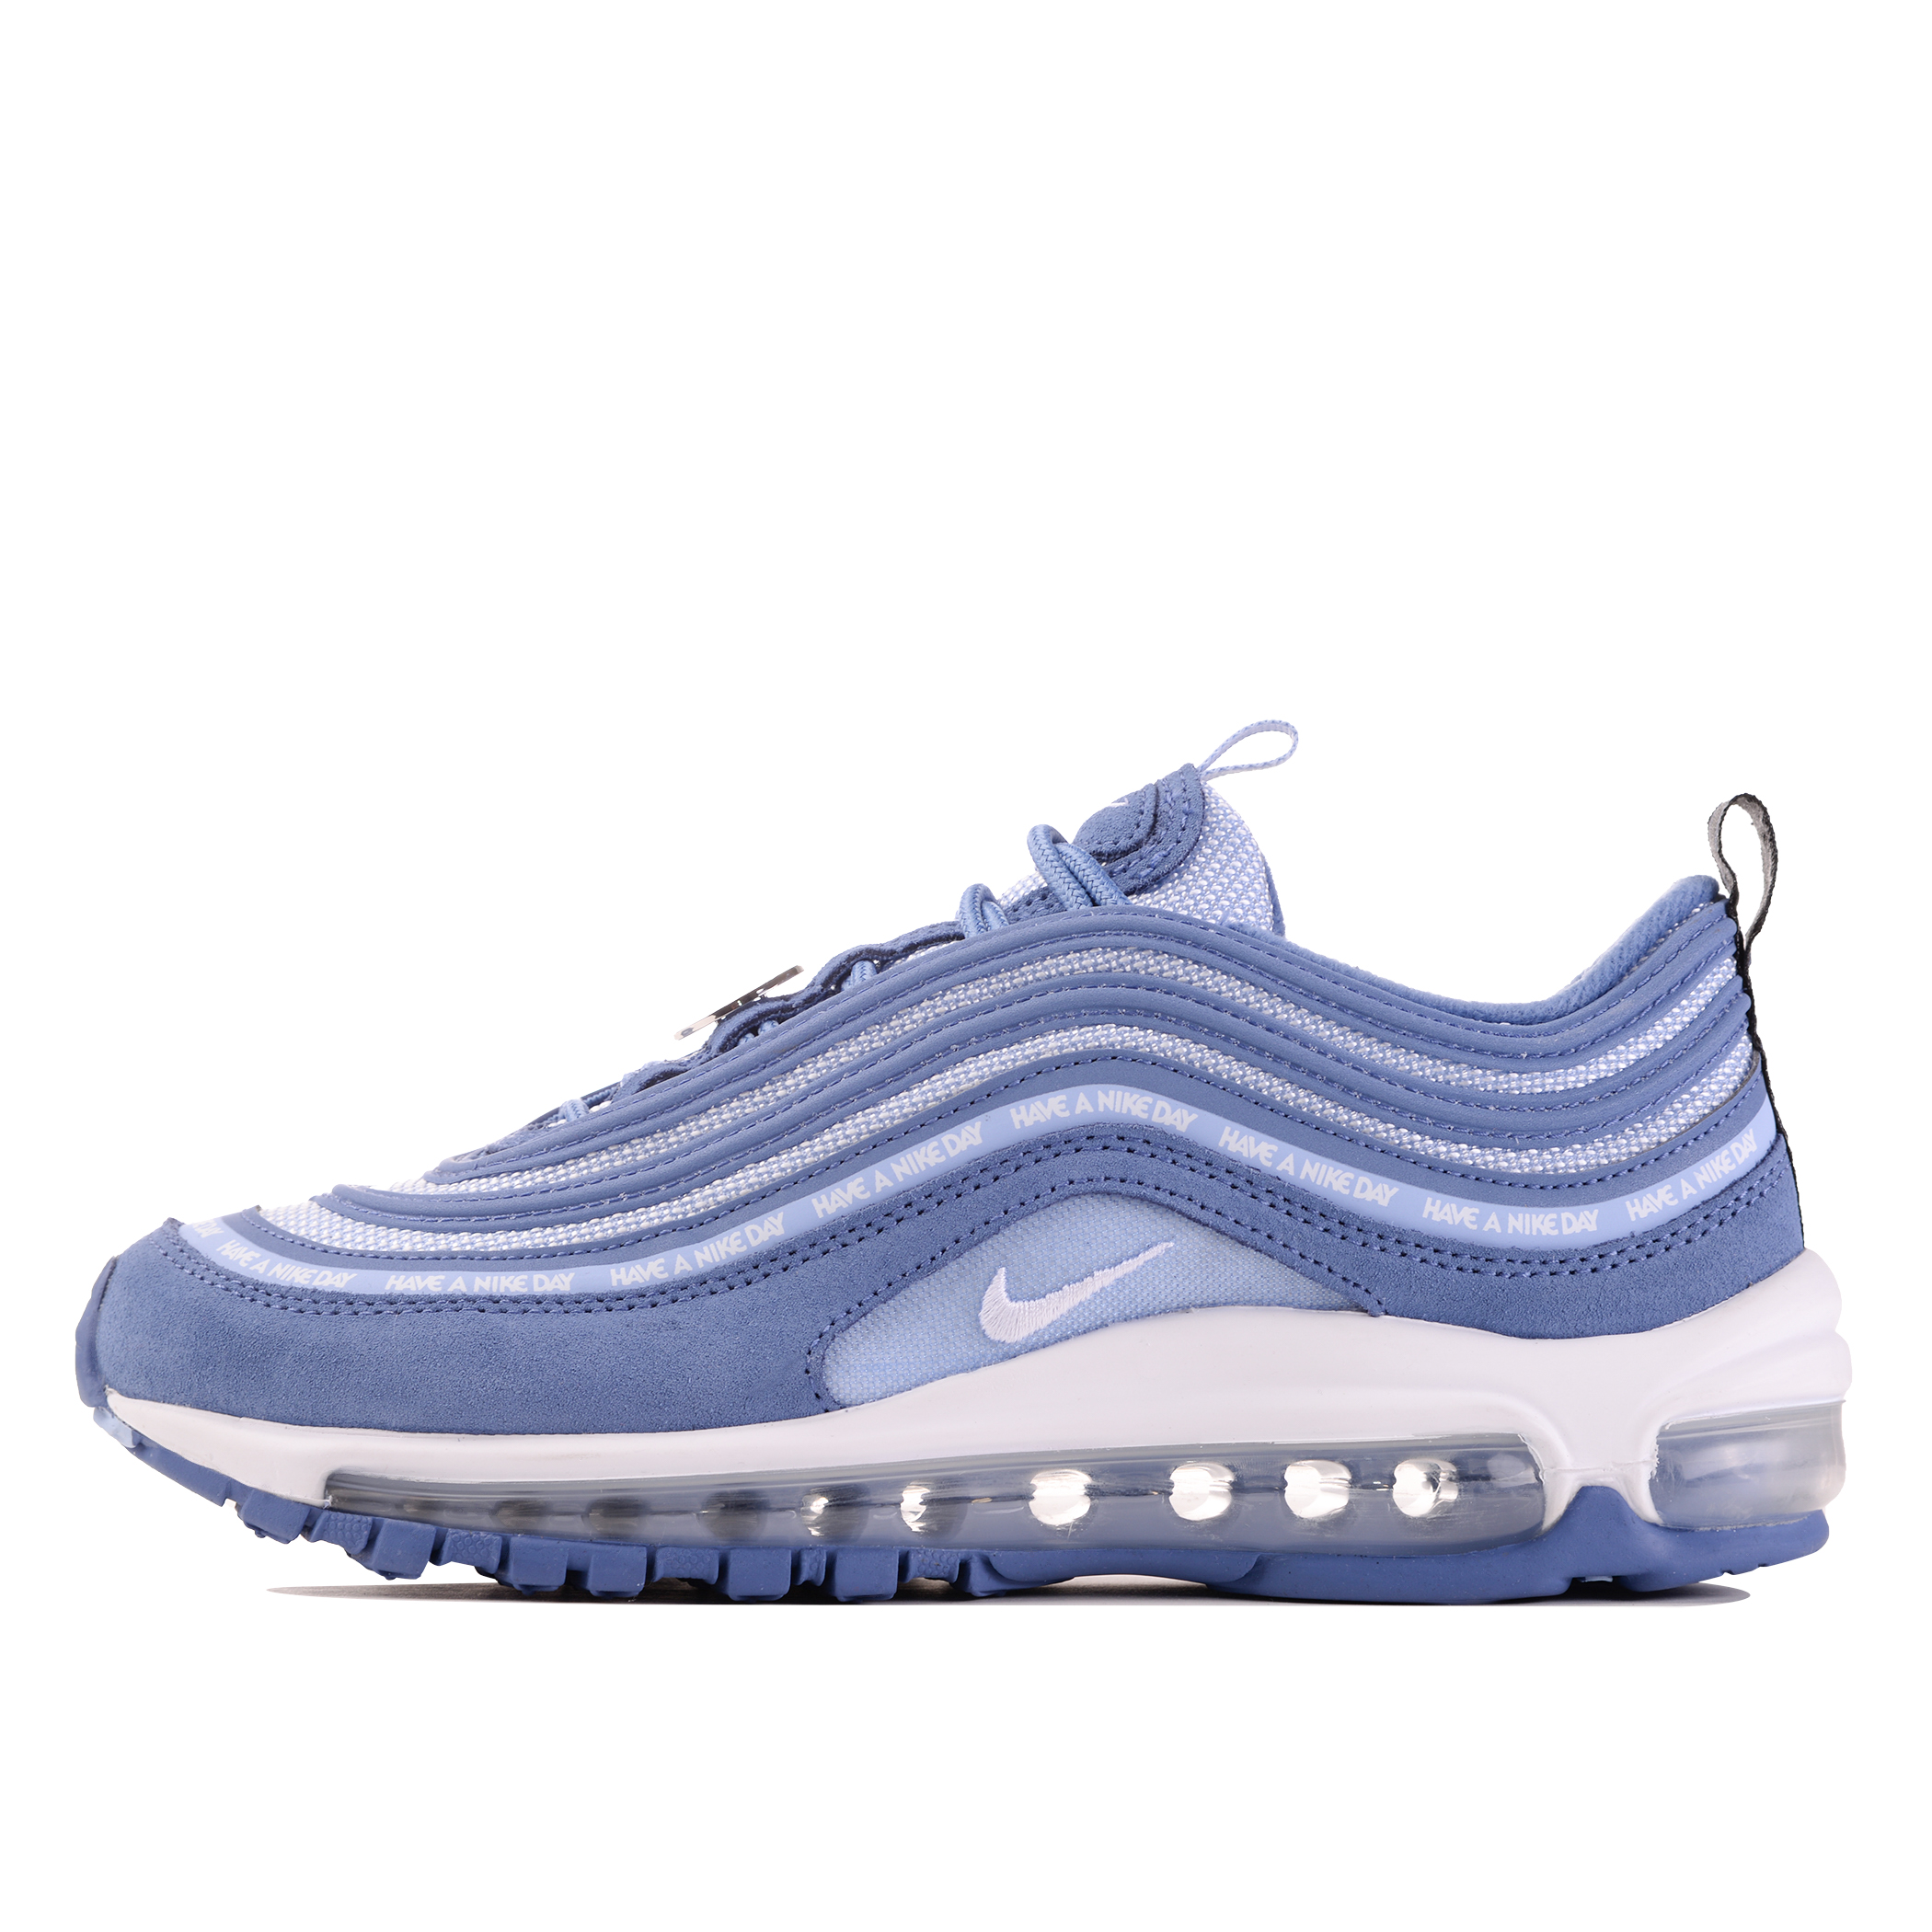 nike air max 97 have a nice day